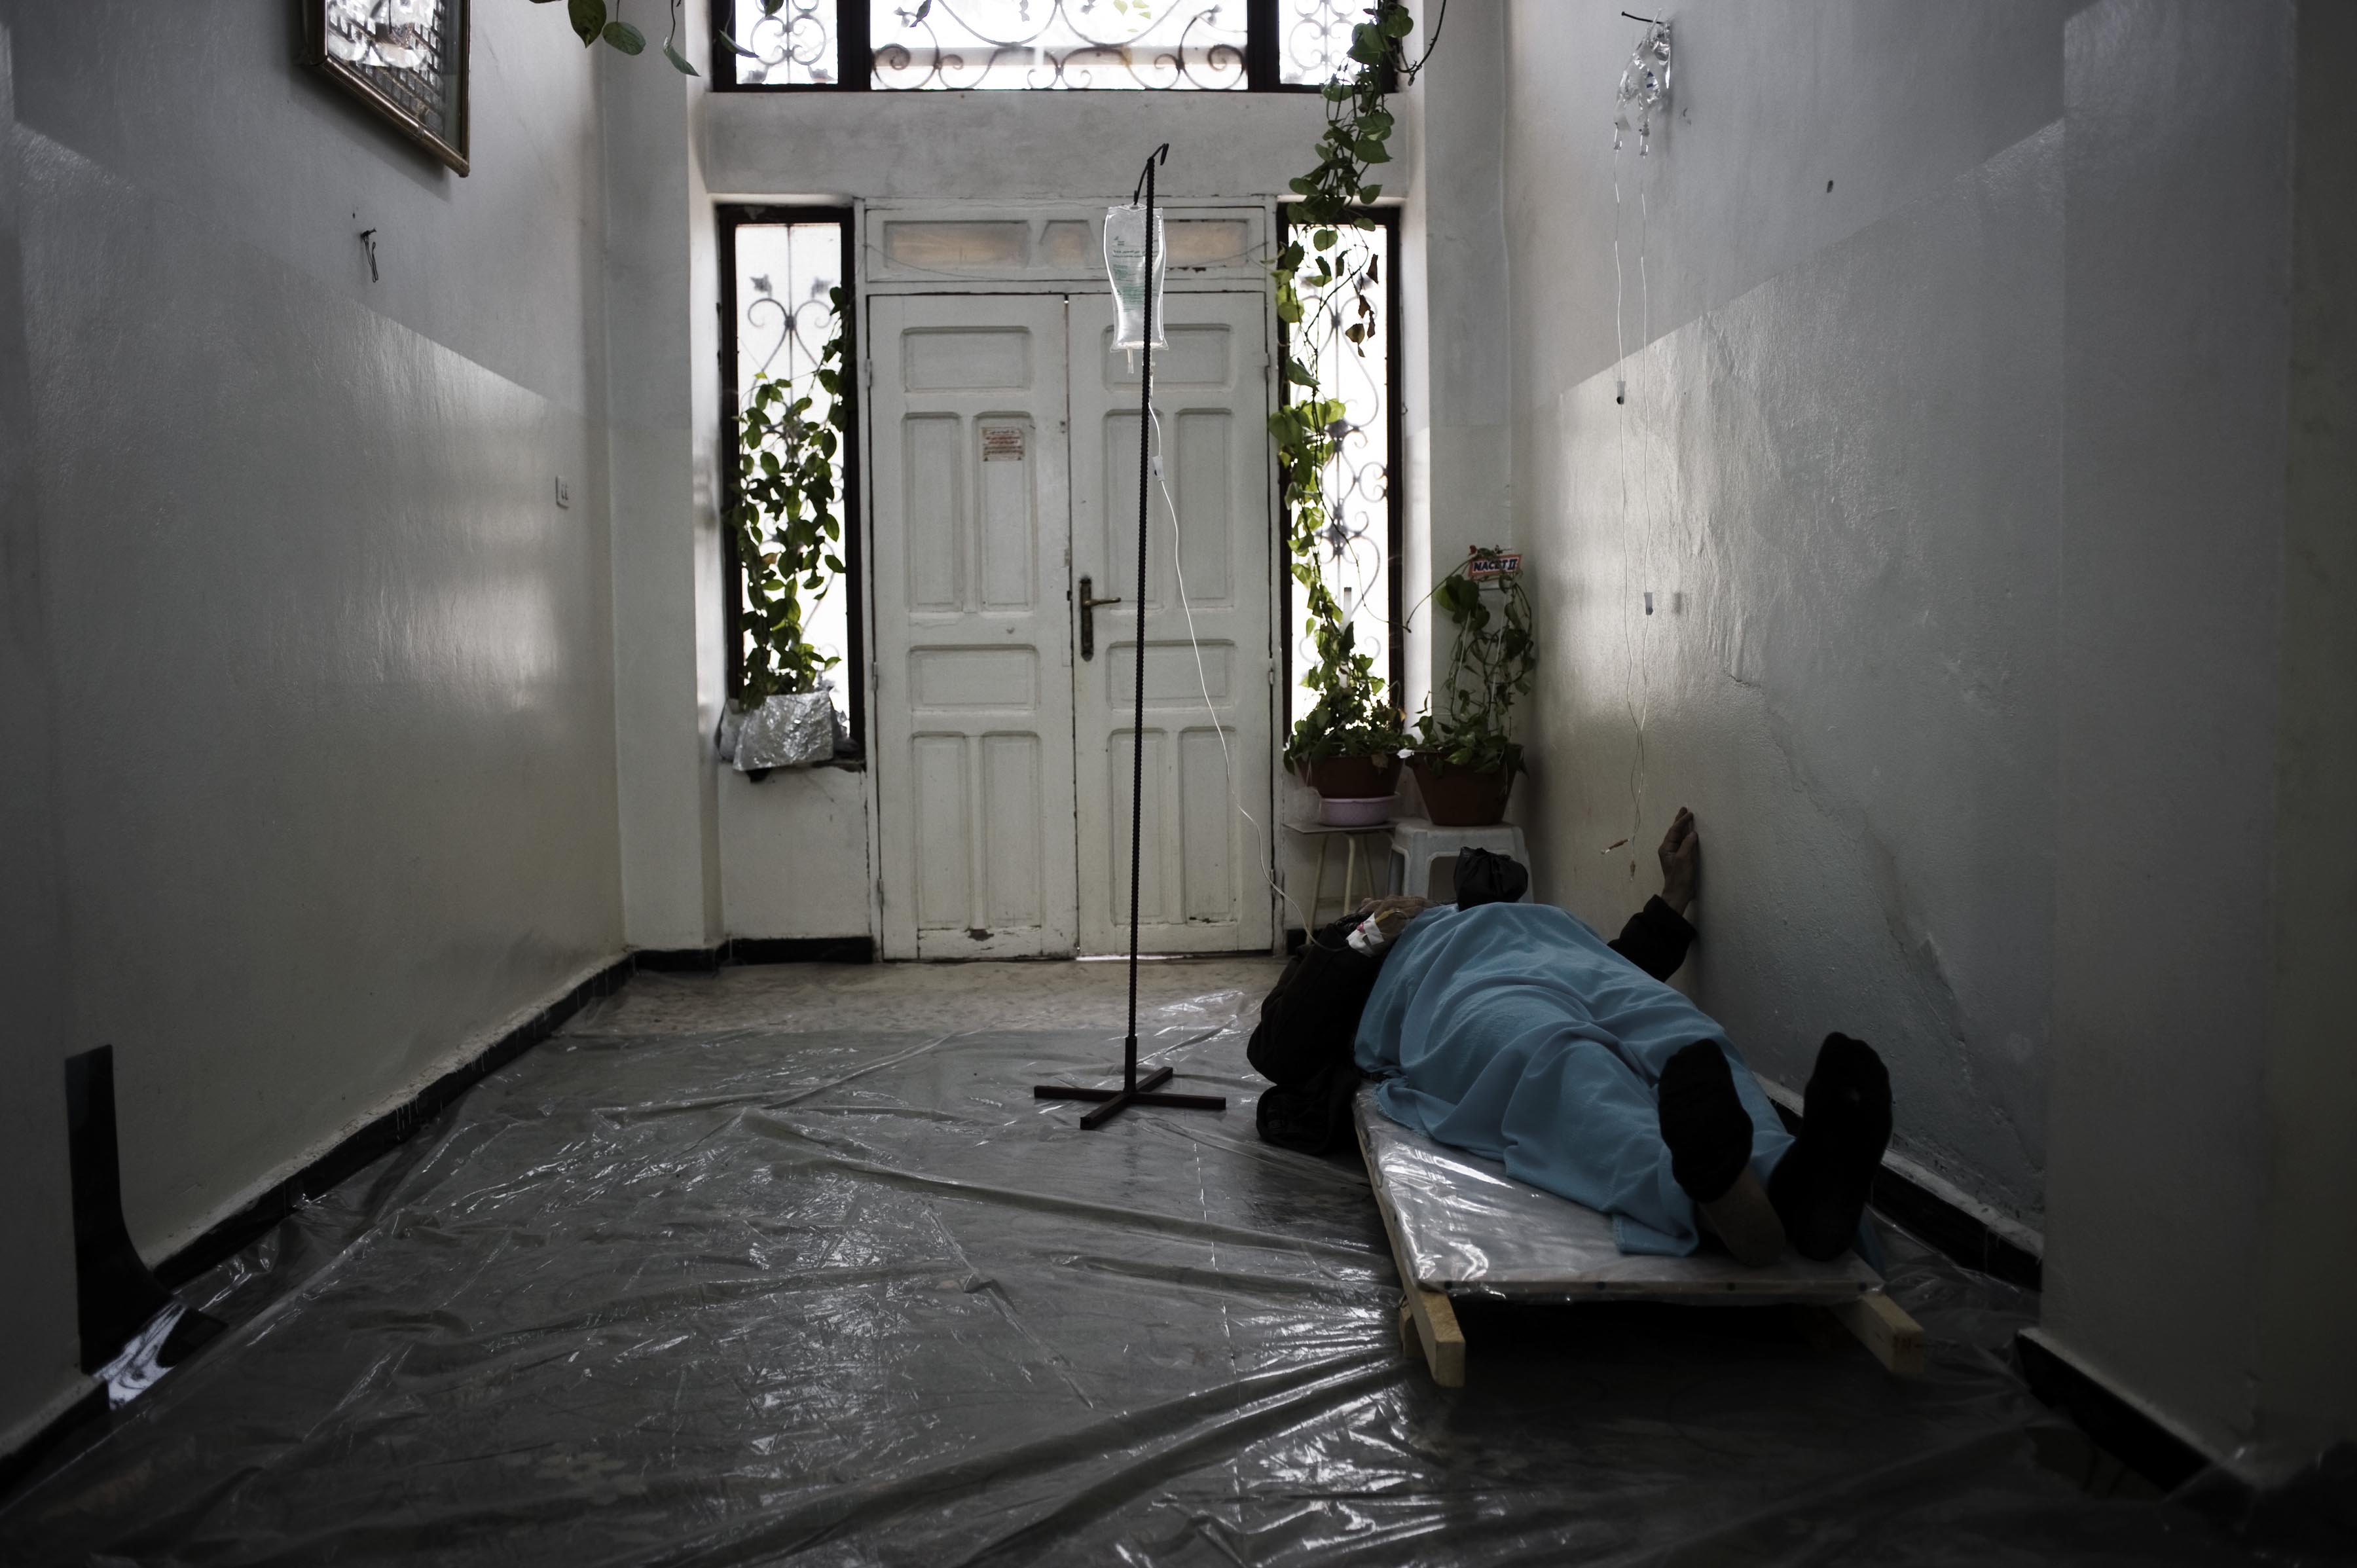 Feb. 22, 2012. A patient lies down in the entrance of a house used as a hospital in Homs Province.